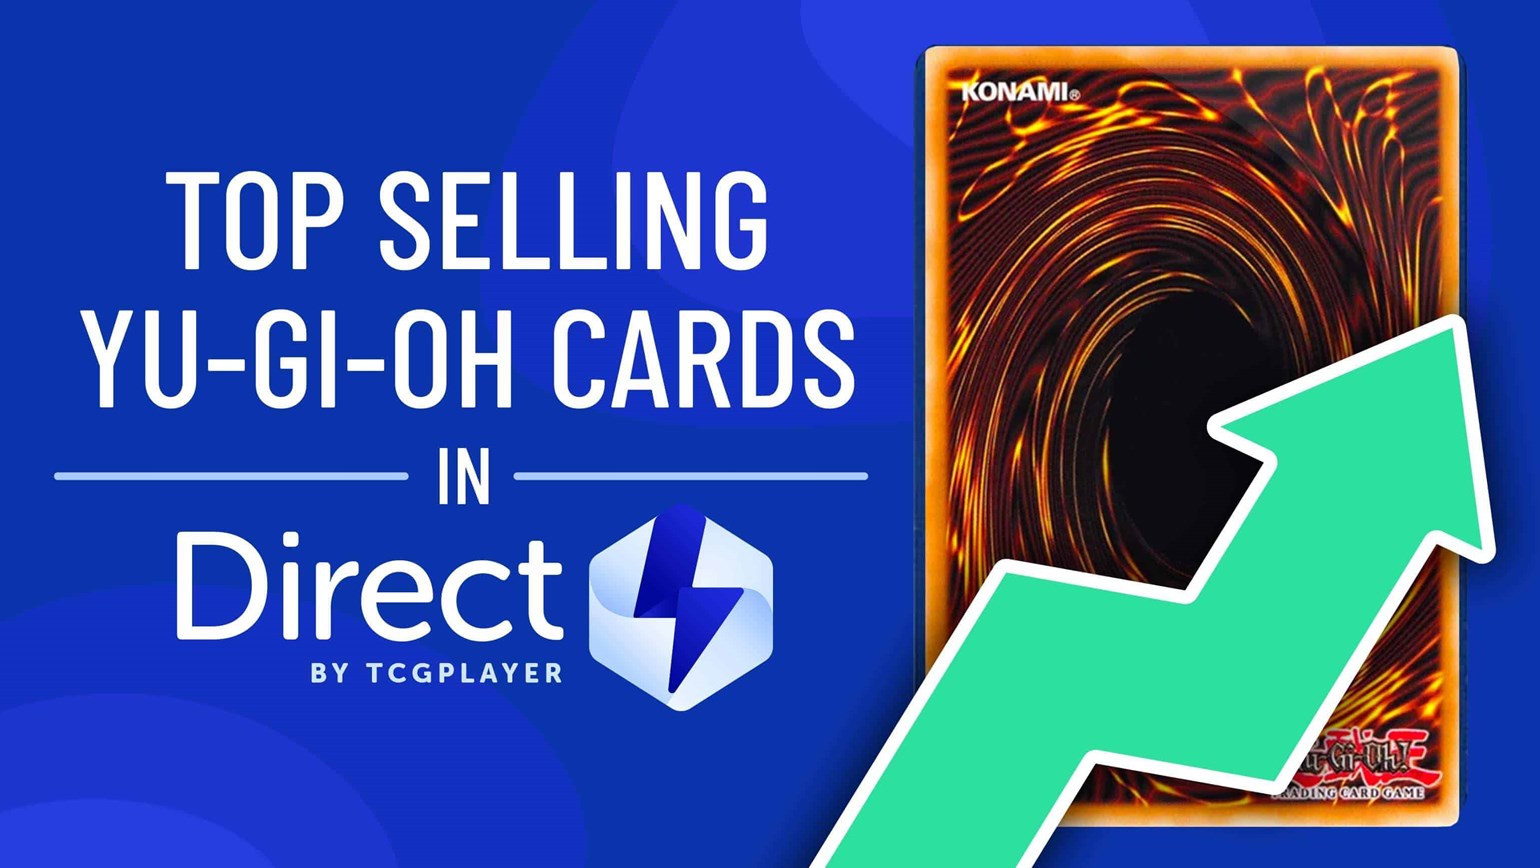 January Top Selling Yu-Gi-Oh! Cards in Direct by TCGplayer